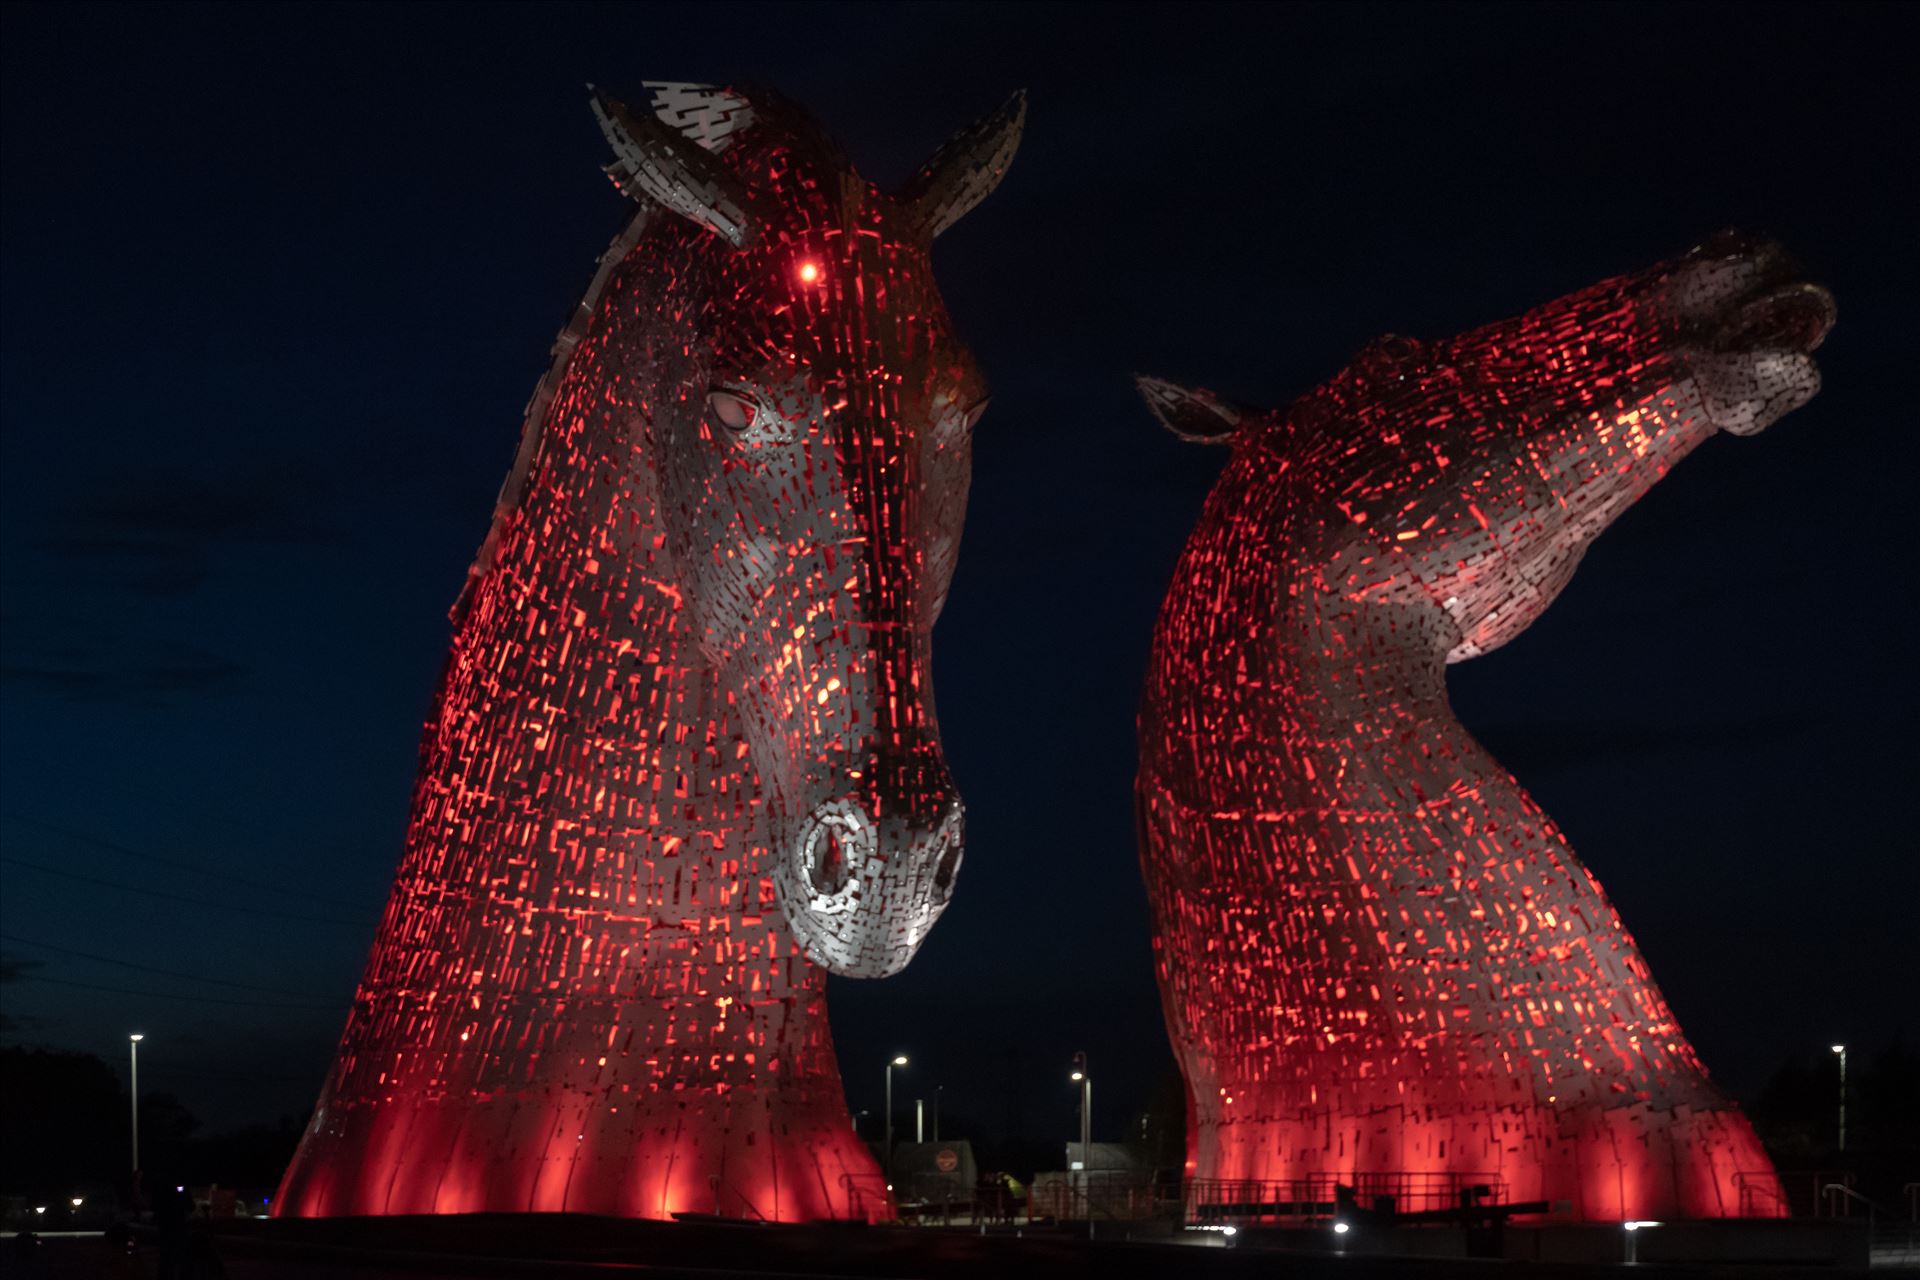 The Kelpies, Falkirk, Scotland - Red - Built of structural steel with a stainless steel cladding, The Kelpies are 30 metres high and weigh 300 tonnes each. Construction began in June 2013 by Graham Dobson Photography